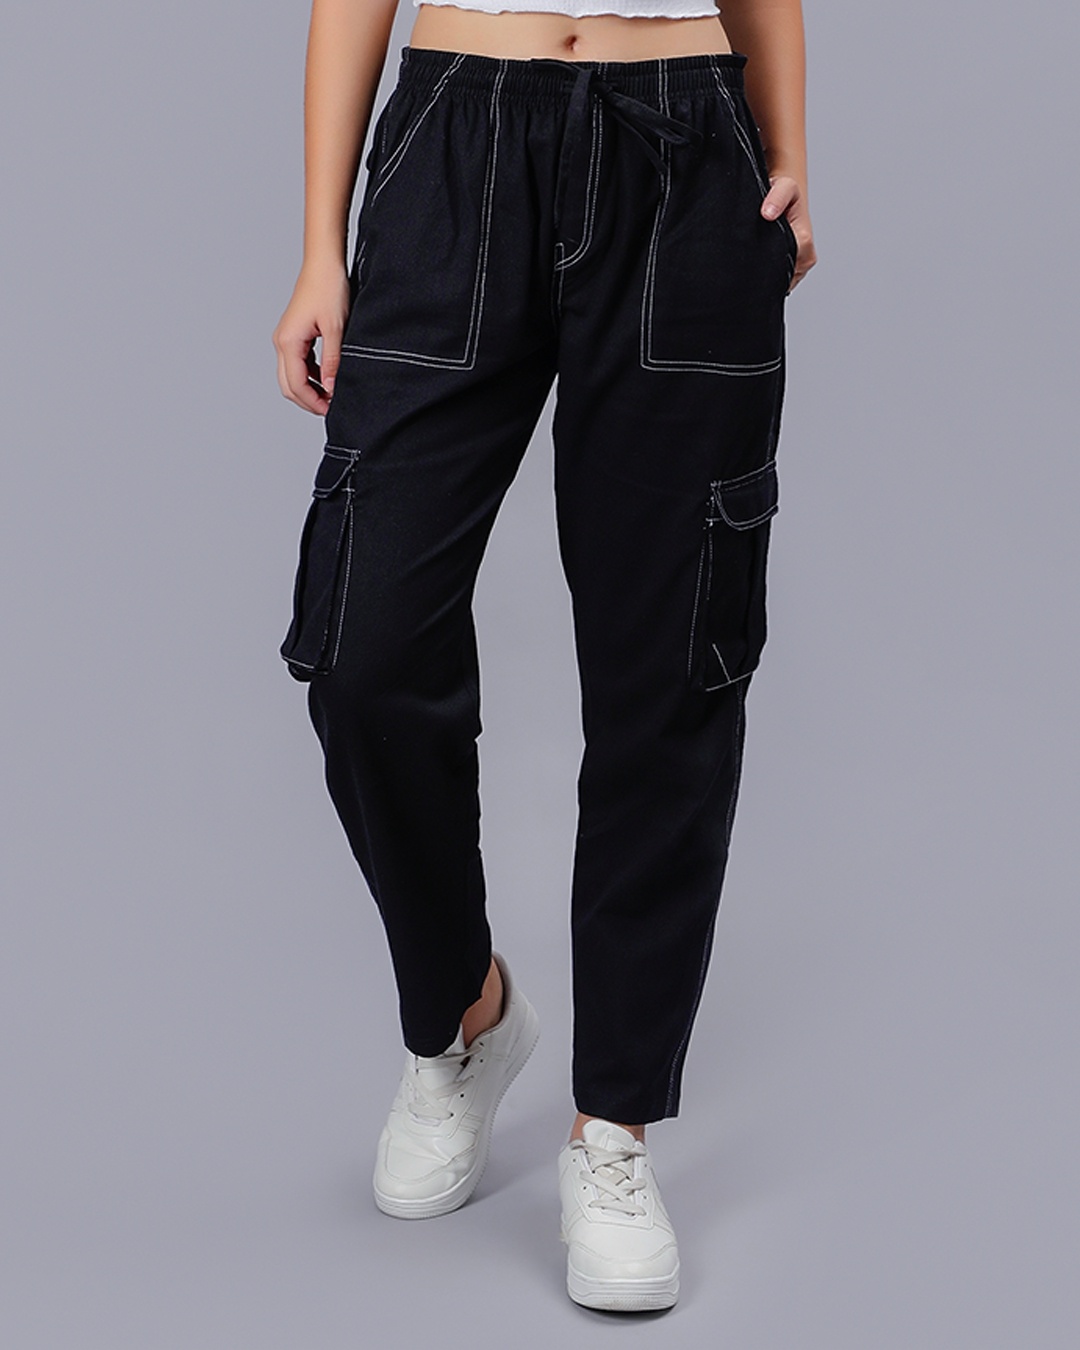 Buy Black Track Pants for Women by ADIDAS Online | Ajio.com